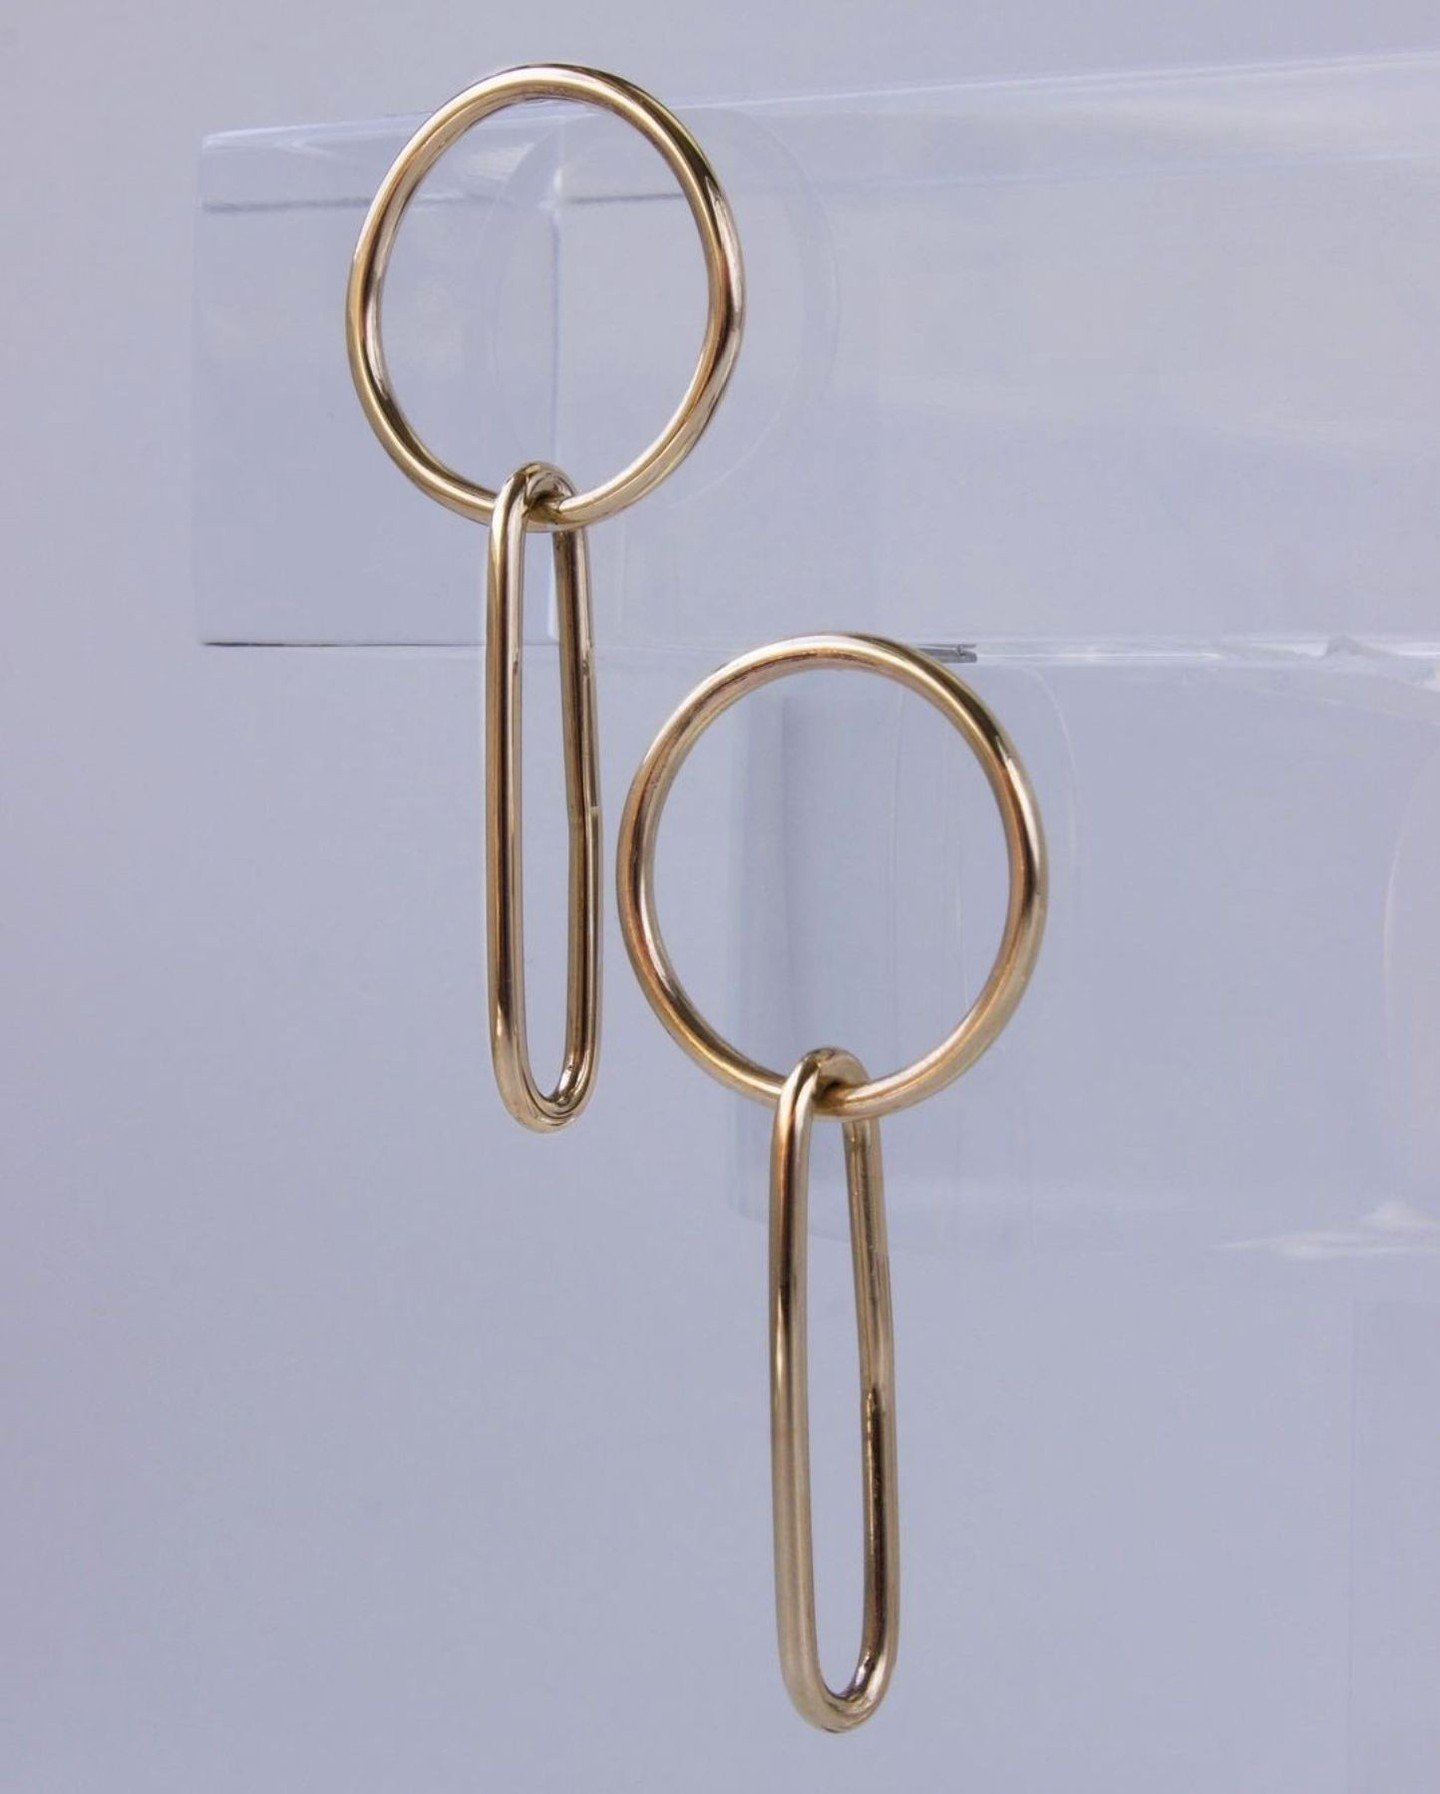 The statement earrings you need this weekend! We're loving this line by @l_greenwaltjewelry, absolutely stunning pieces!